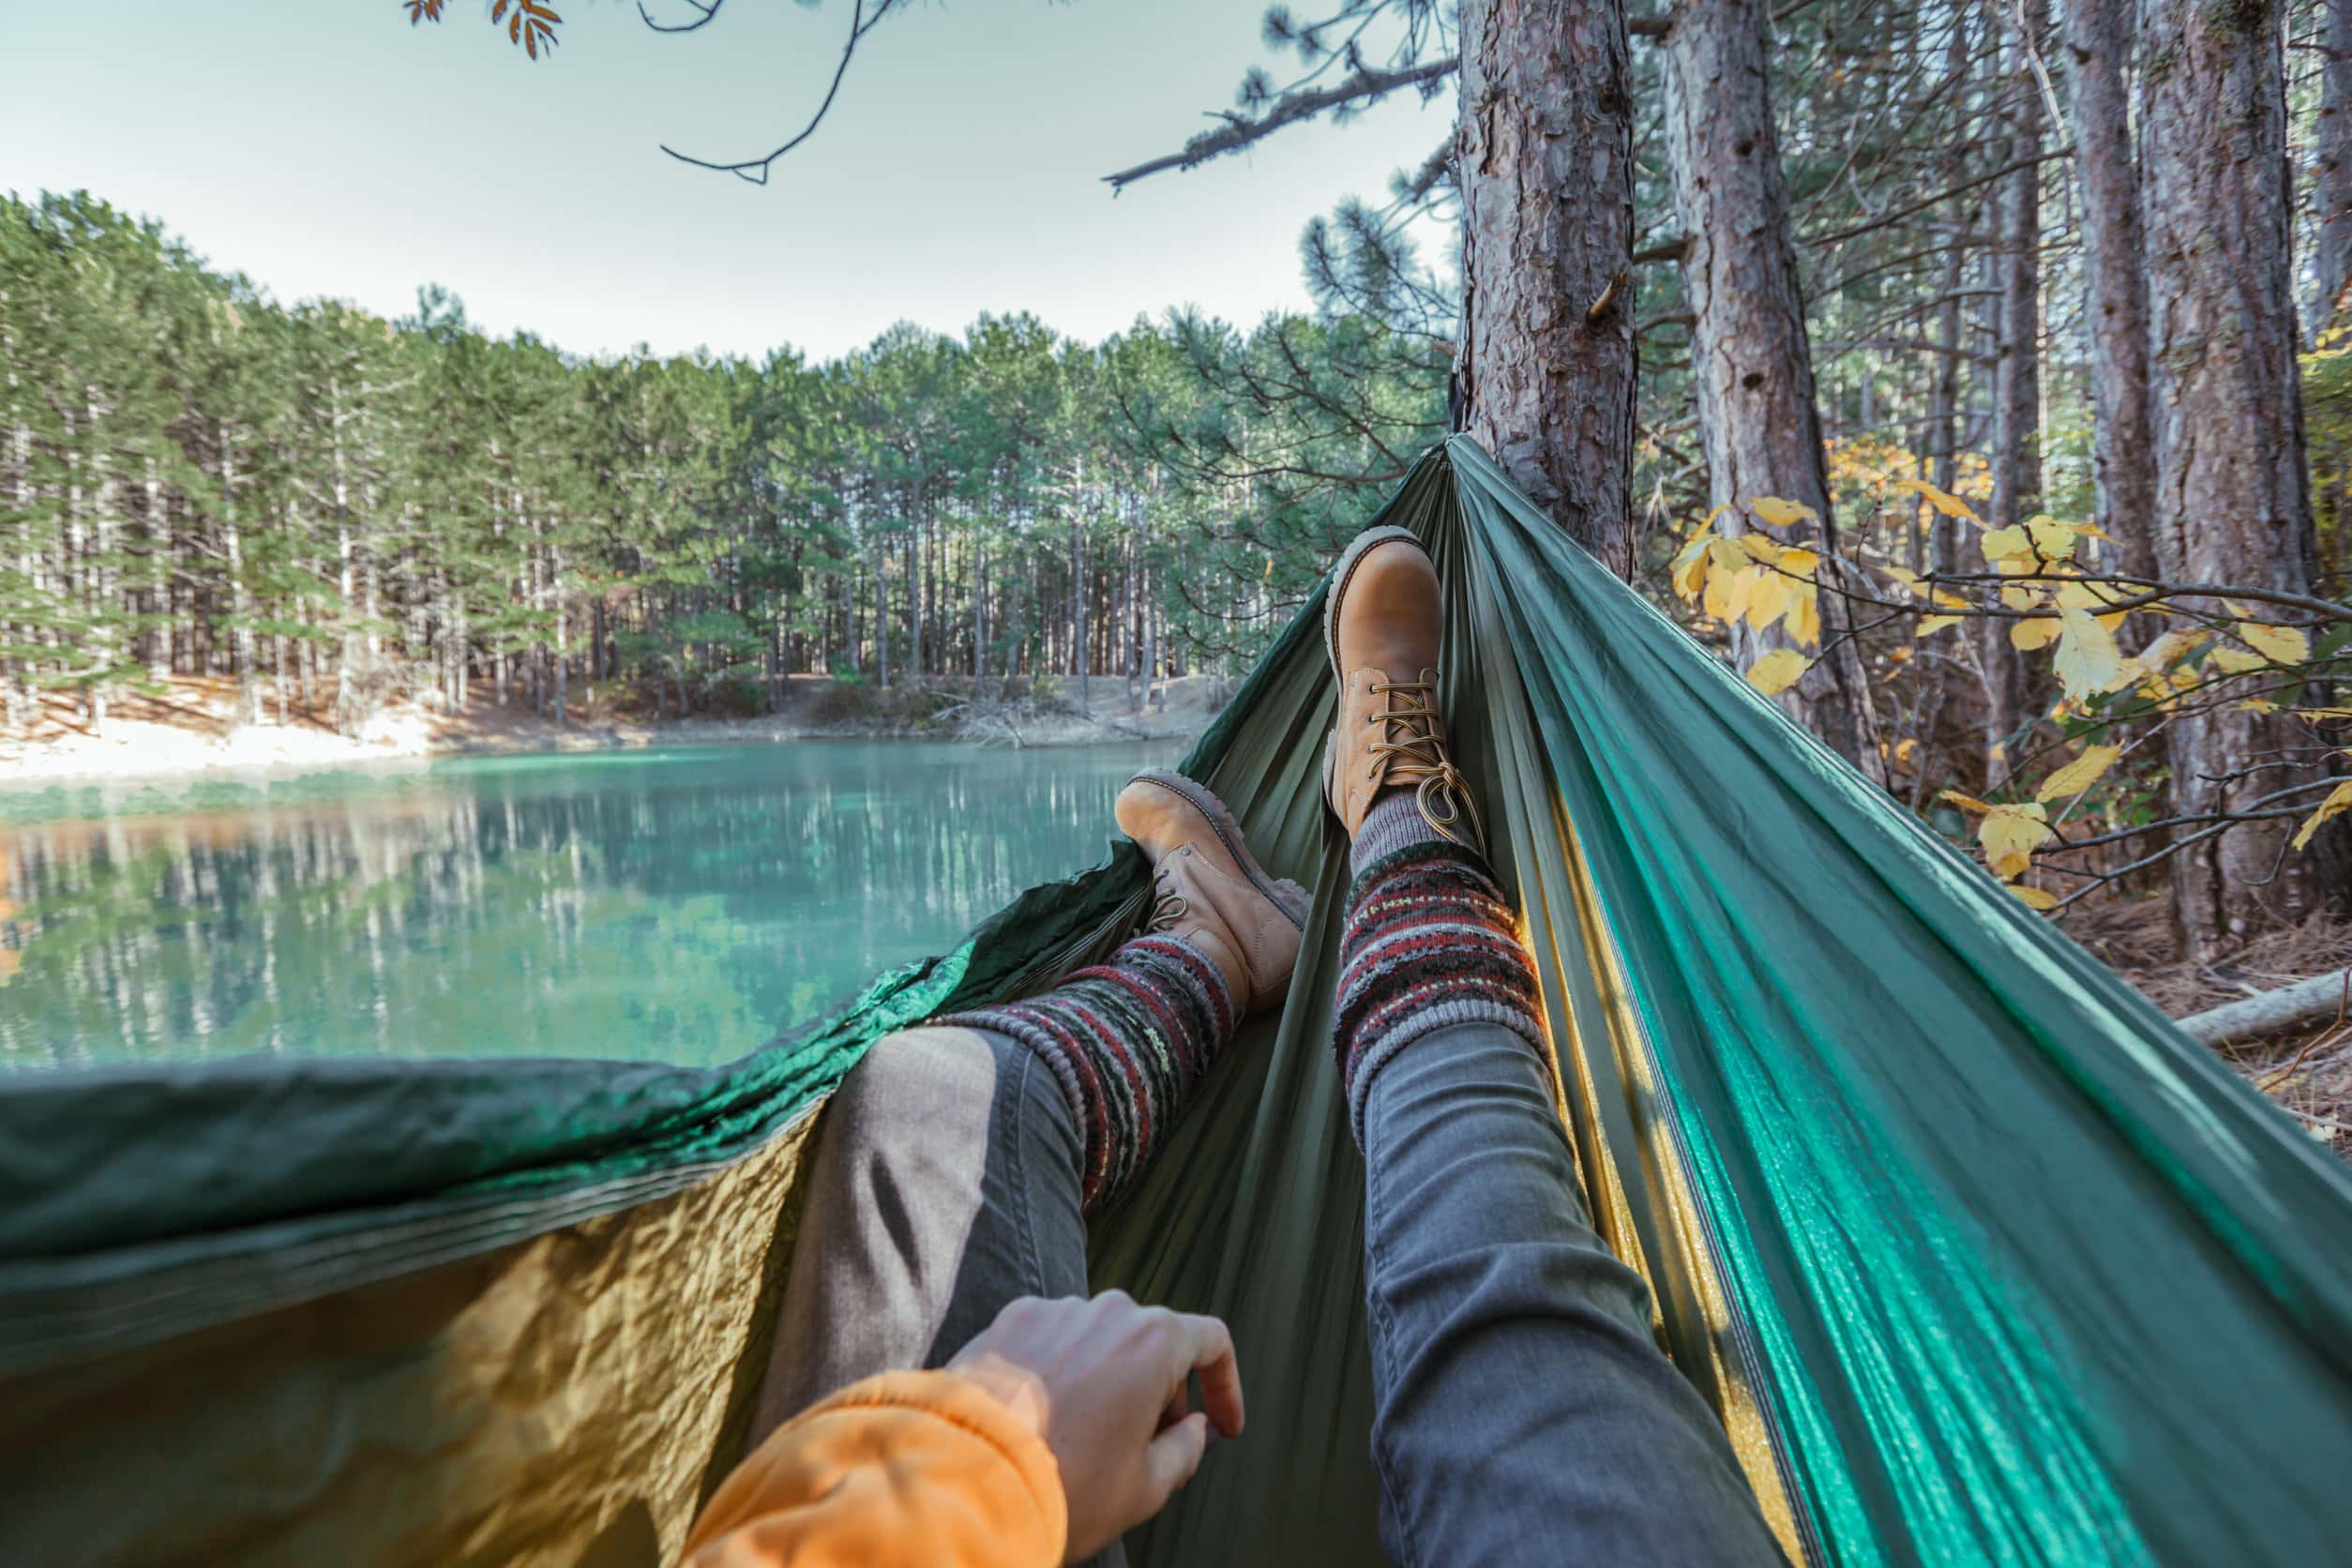 a first person view of a hiker in a hammock